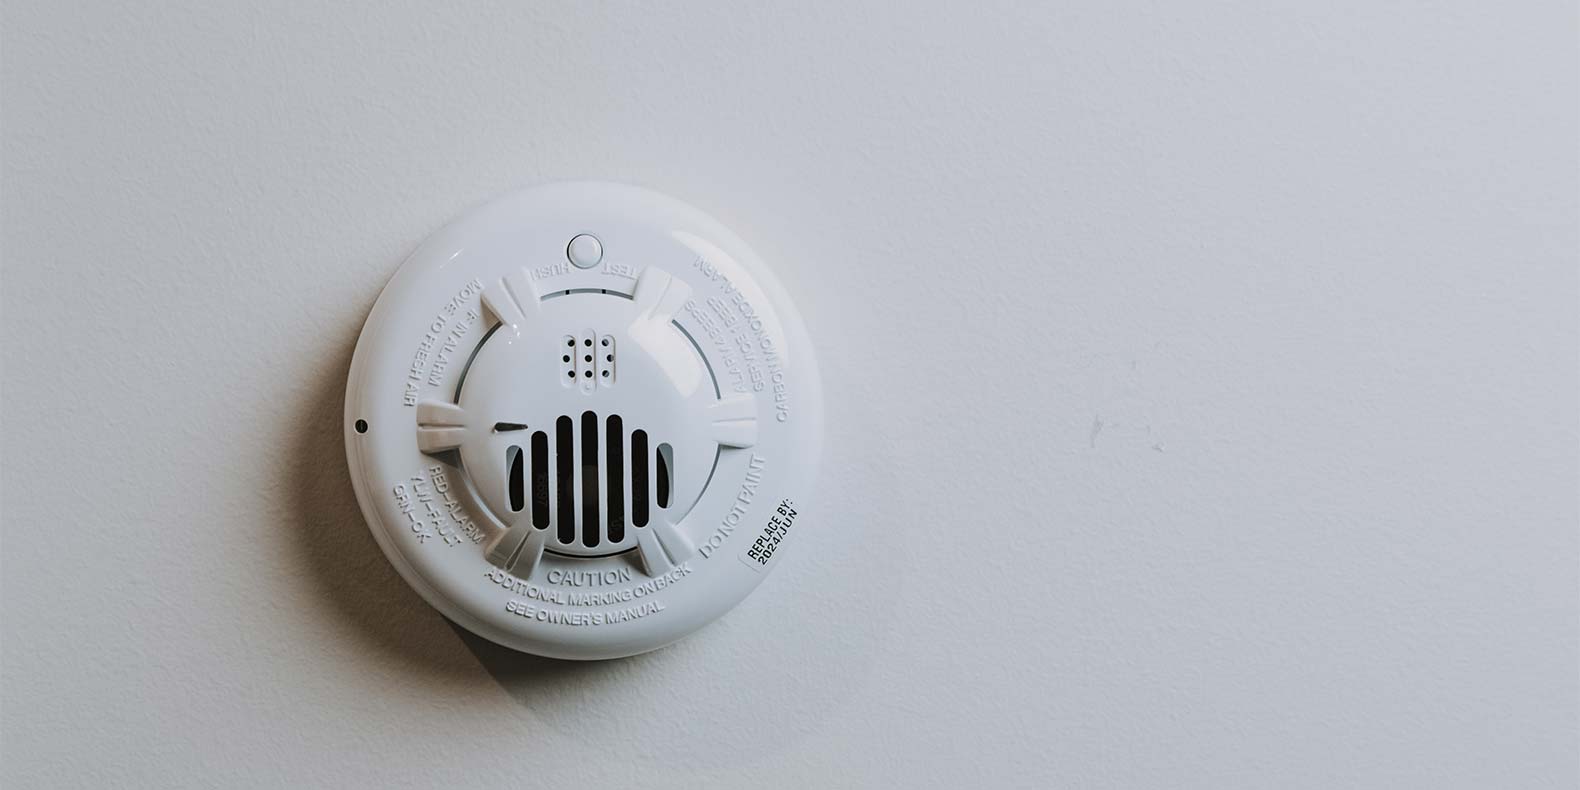 Fact Finders: Where's the best place in your home for a carbon monoxide  detector?